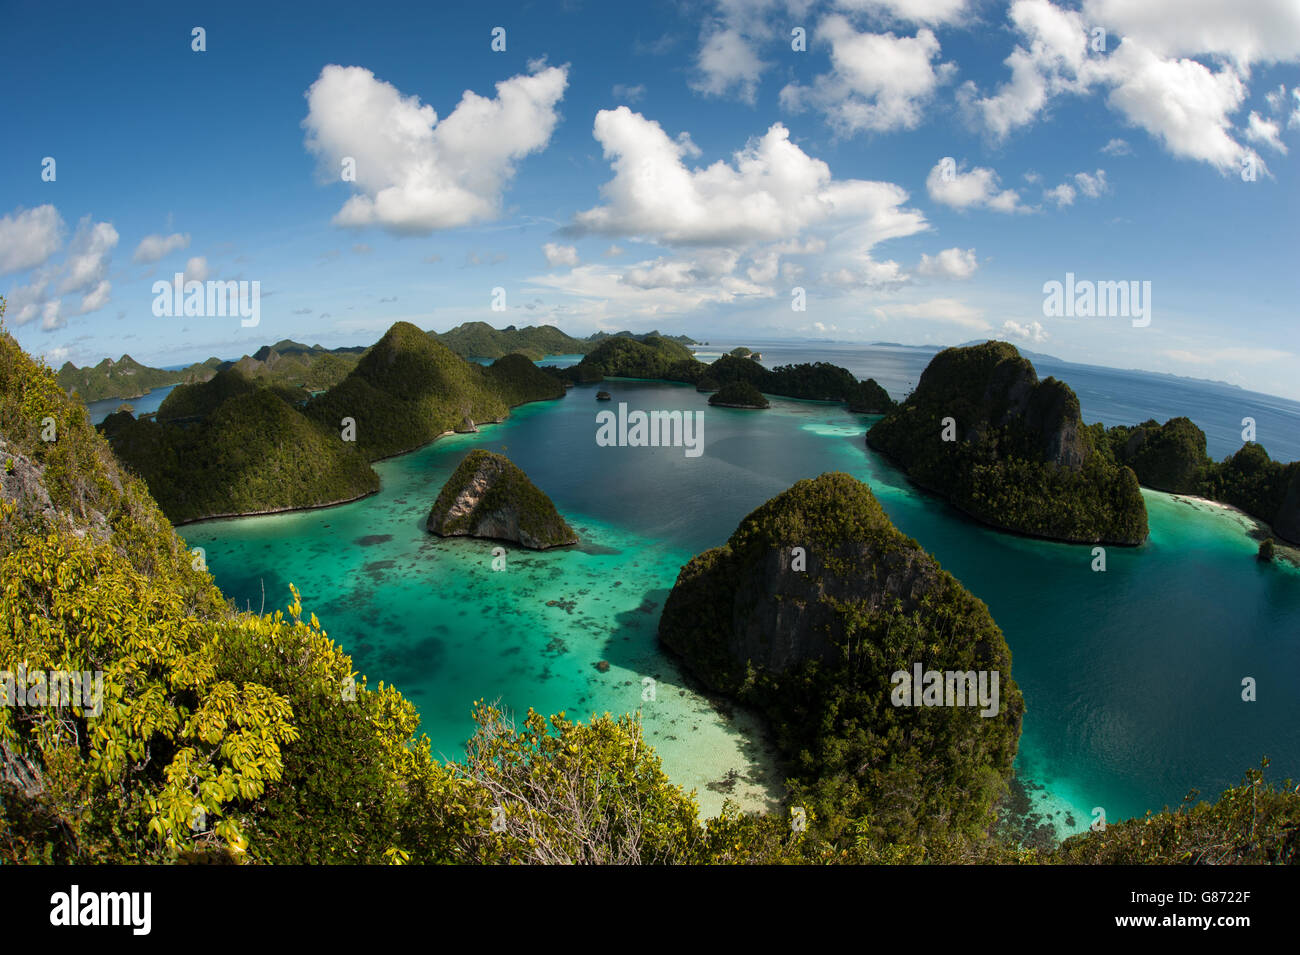 Tropical islands and bays, Sorong, West Papua, Indonesia Stock Photo